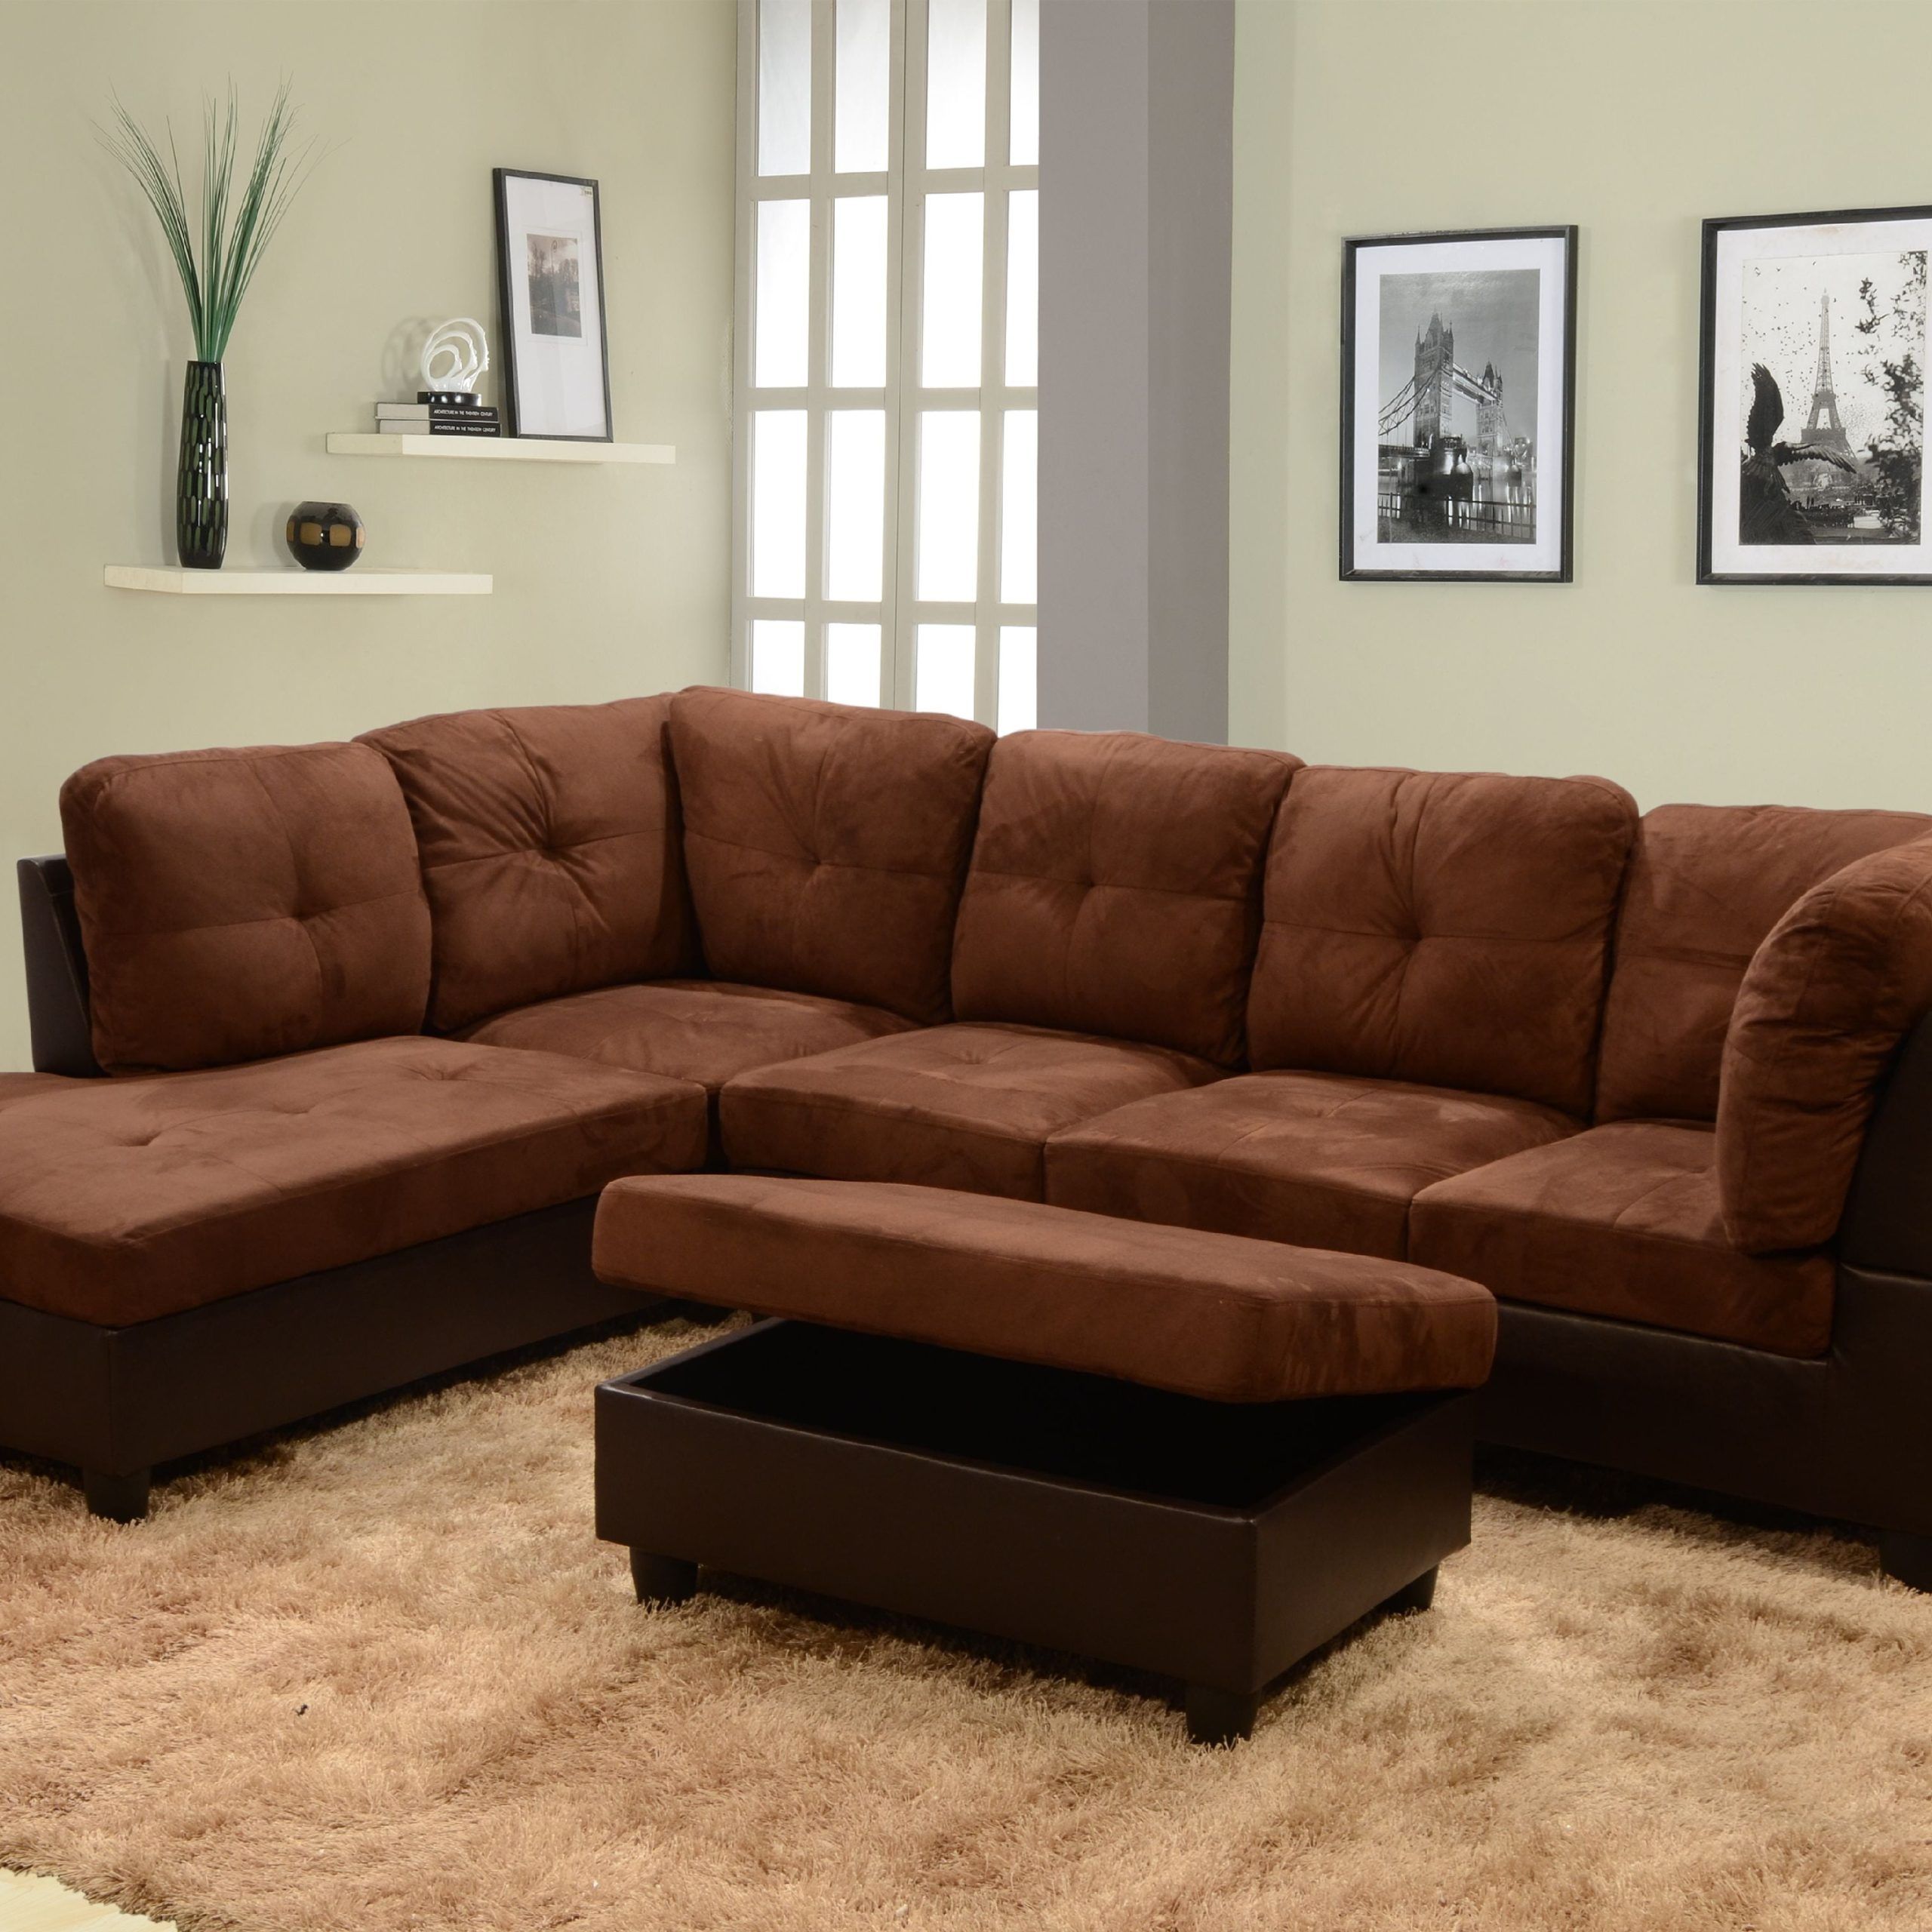 Matt Right Facing Sectional Sofa With Ottoman,chocolate – Walmart In Sofas With Ottomans (Gallery 3 of 20)